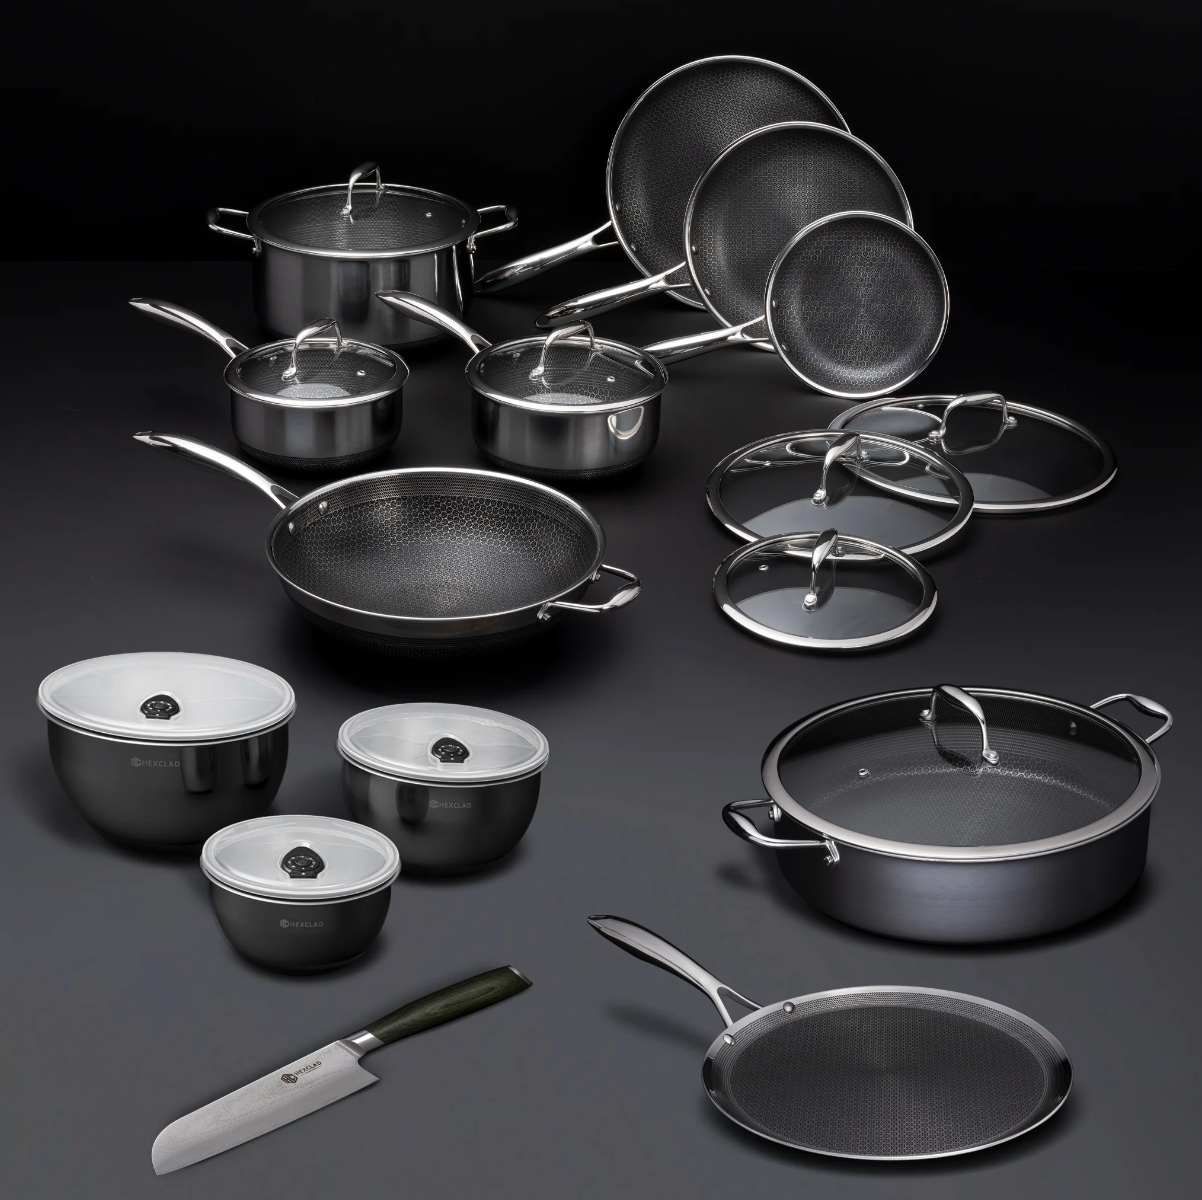 HexClad 7-Piece Hybrid Stainless Steel Cookware Set with Lids and